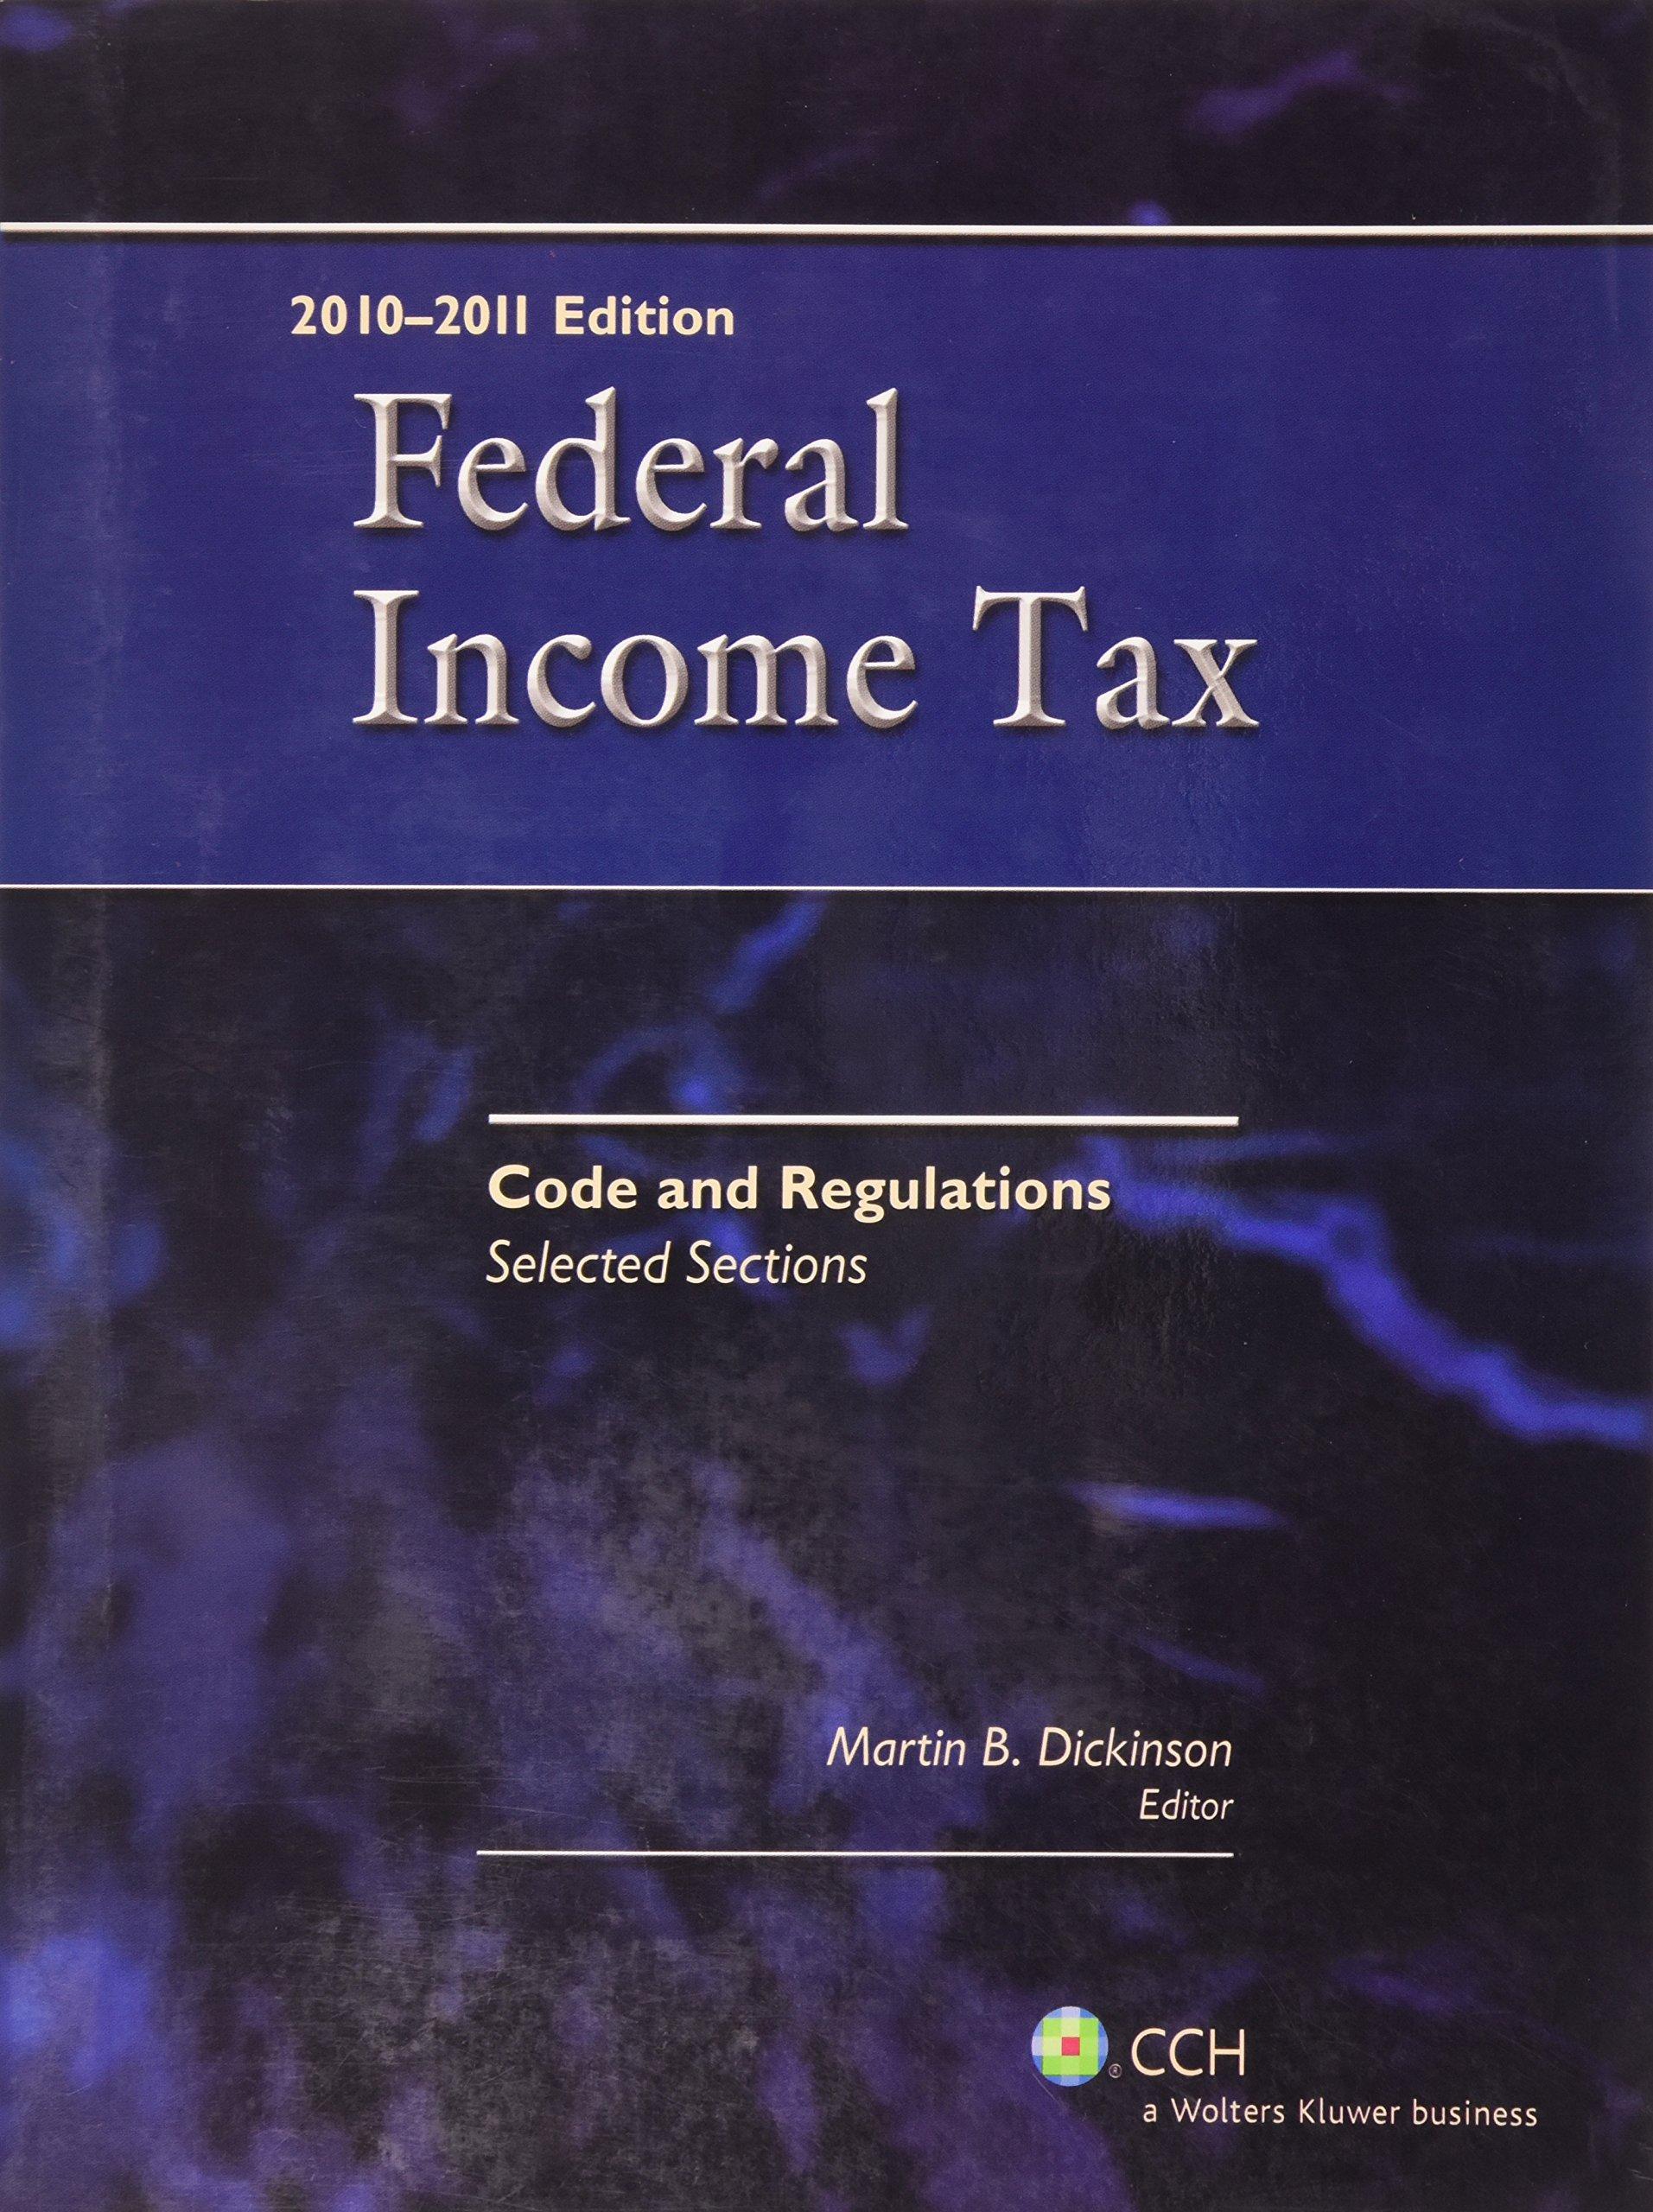 federal income tax code and regulations selected sections 2010-2011 edition martin b. dickinson 0808023829,